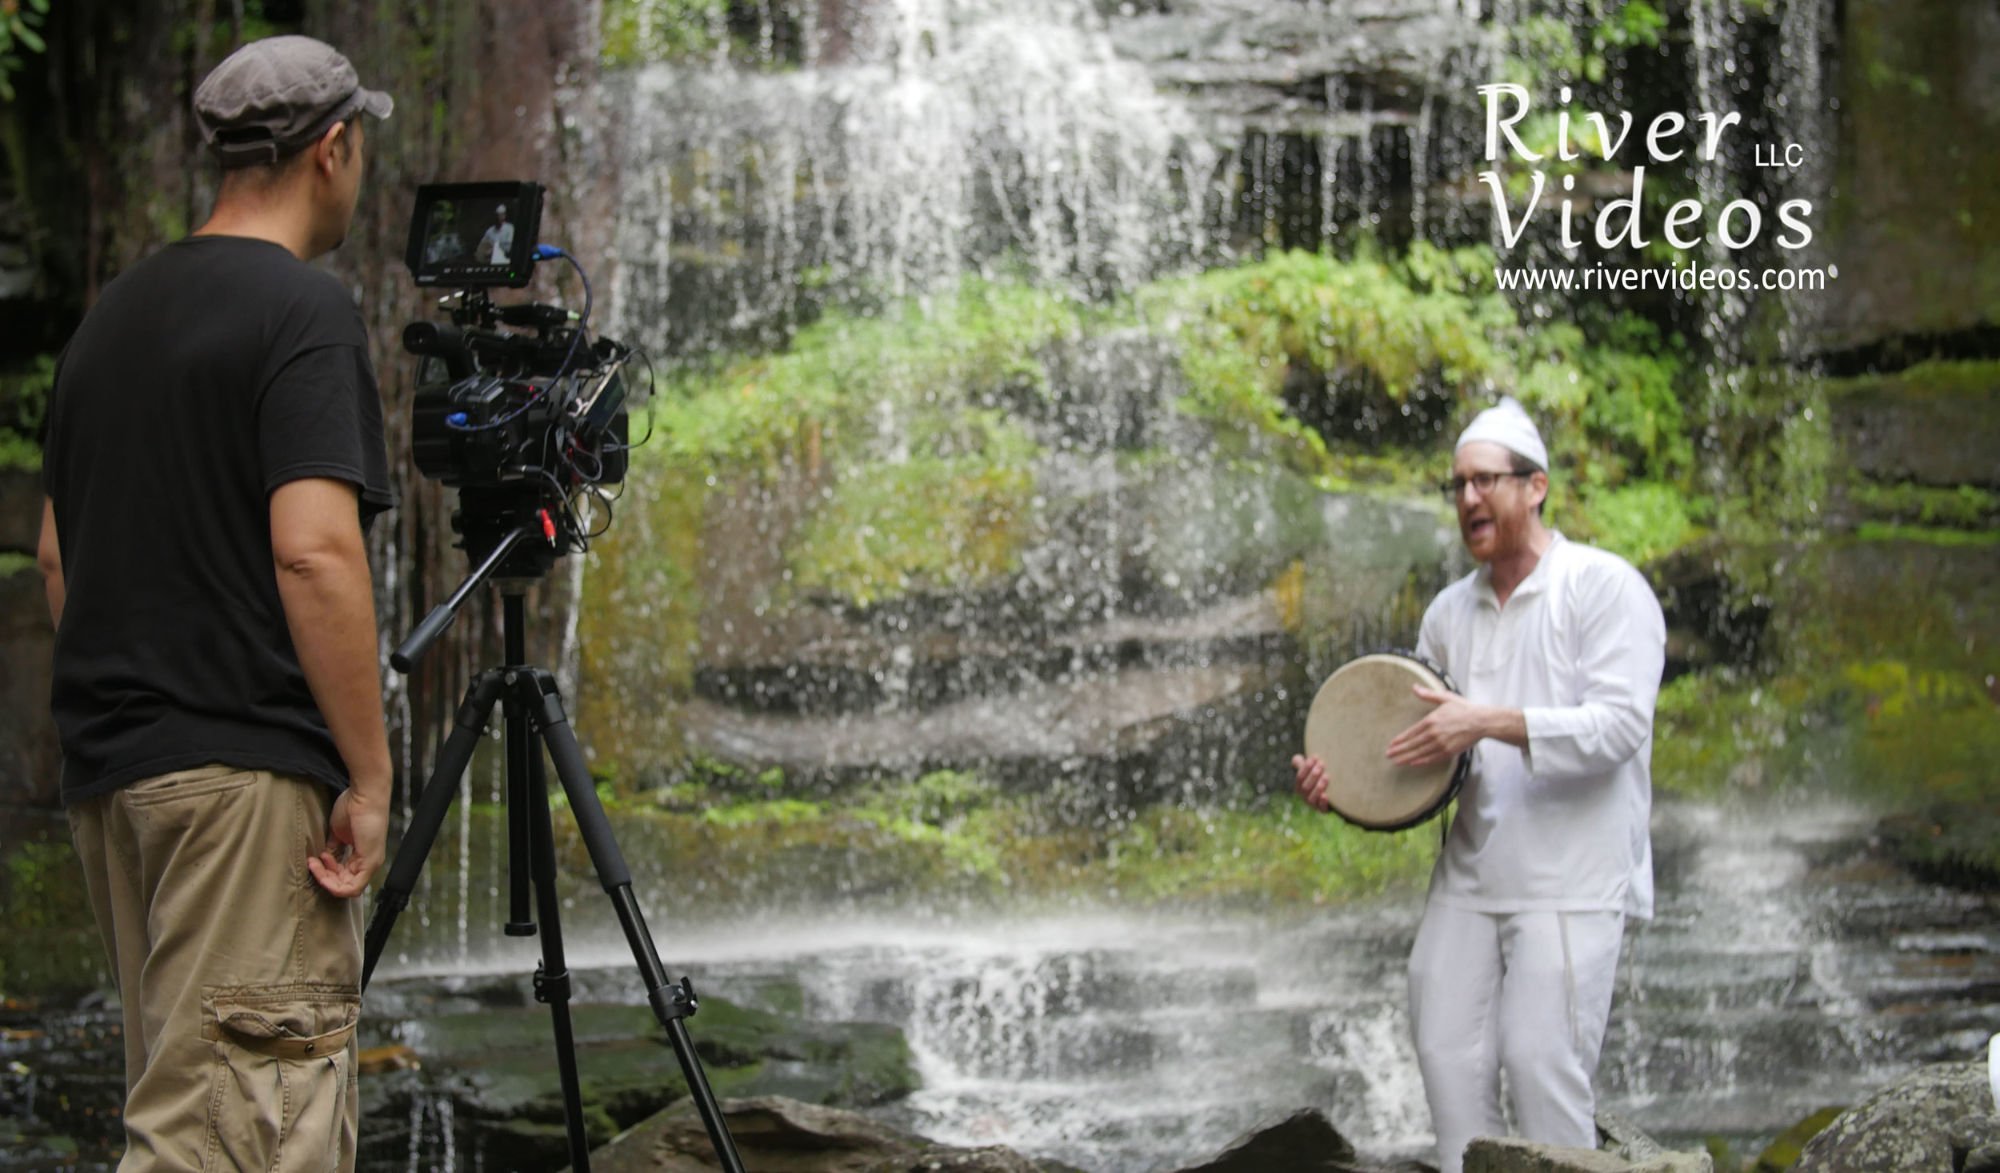 Filming+Pace+under+the+waterfall (Reduced Size).jpg